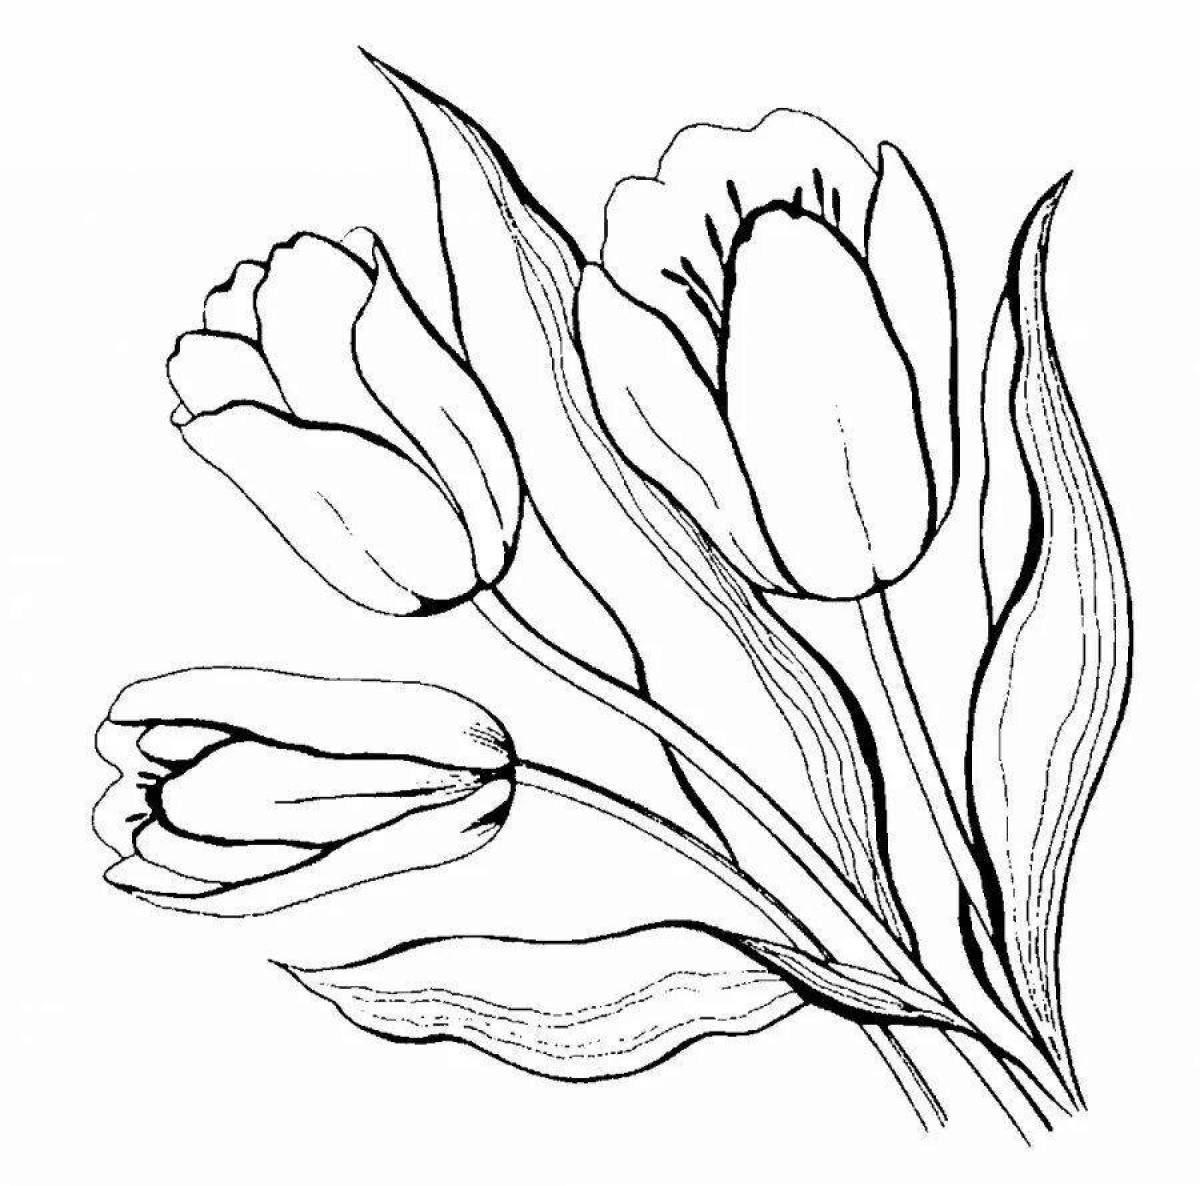 Coloring for bright tulips for children